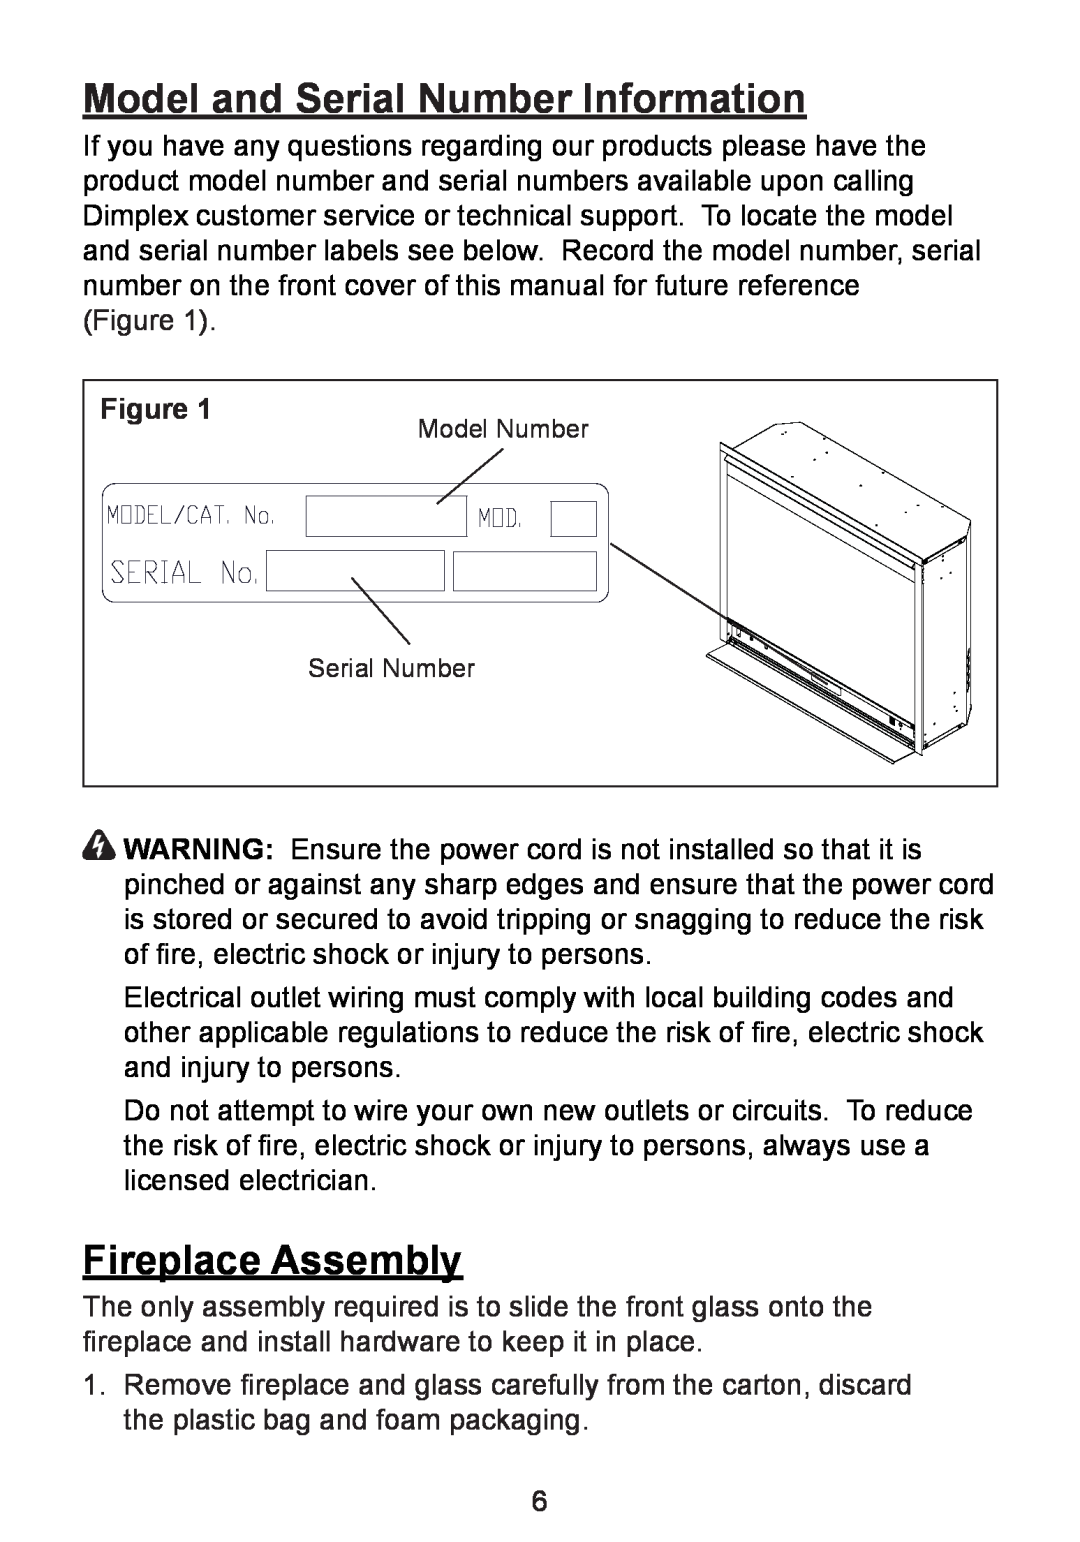 Dimplex BF8000ST owner manual Model and Serial Number Information, Fireplace Assembly 